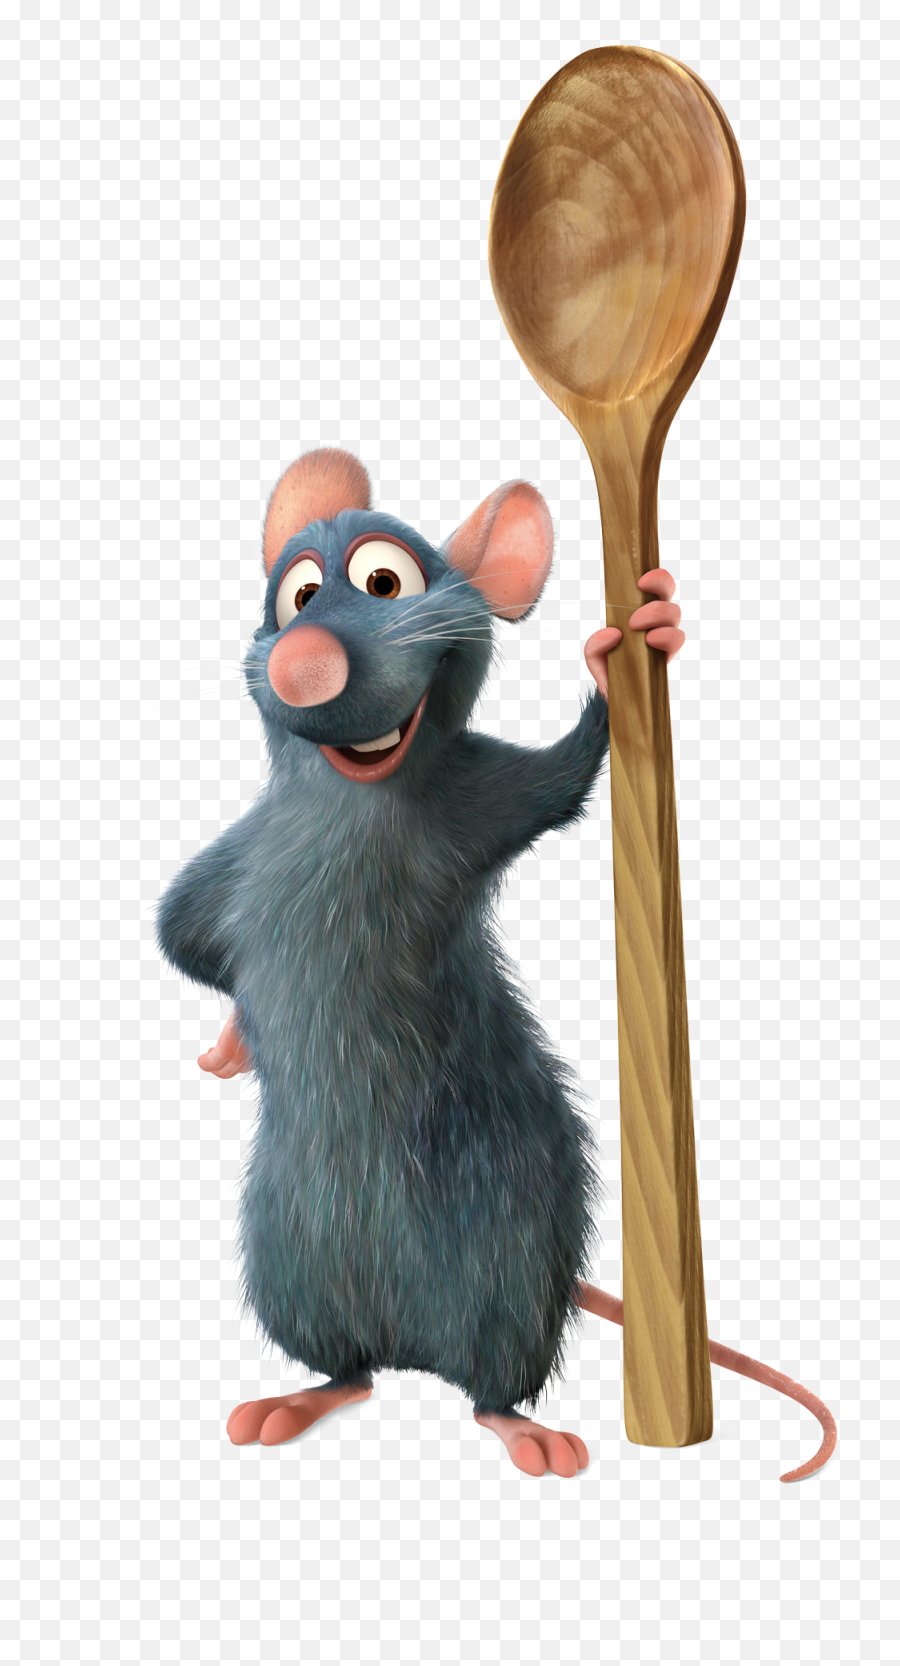 10 Best Rat From Ratatouille Ideas - Ratatouille Png Emoji,Remy The Rat What Emotion